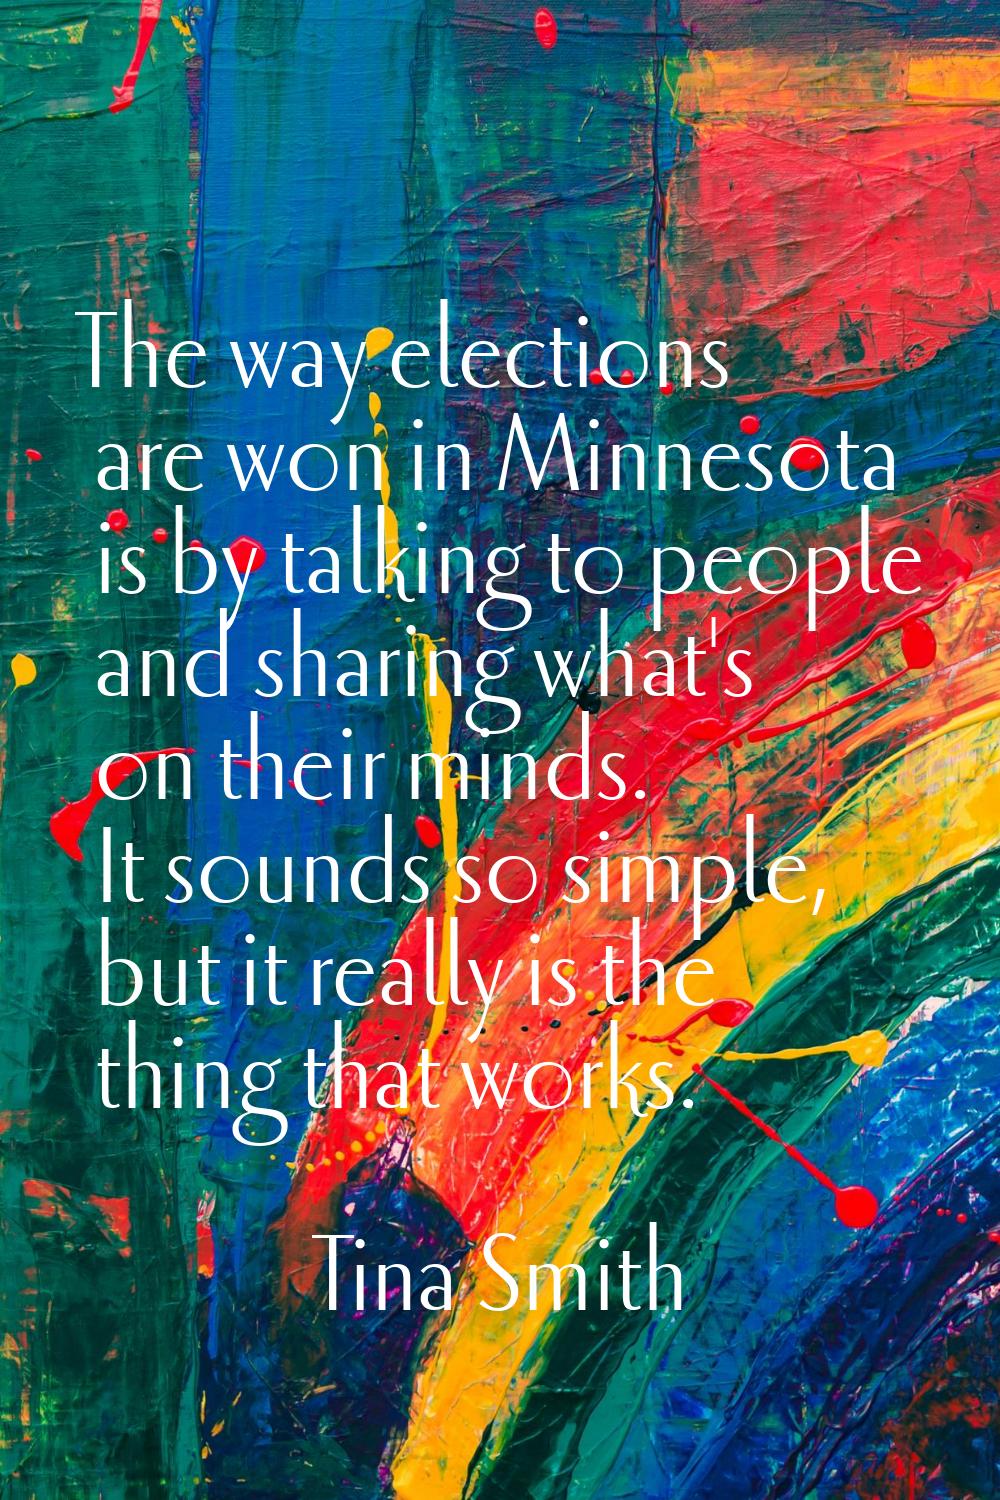 The way elections are won in Minnesota is by talking to people and sharing what's on their minds. I